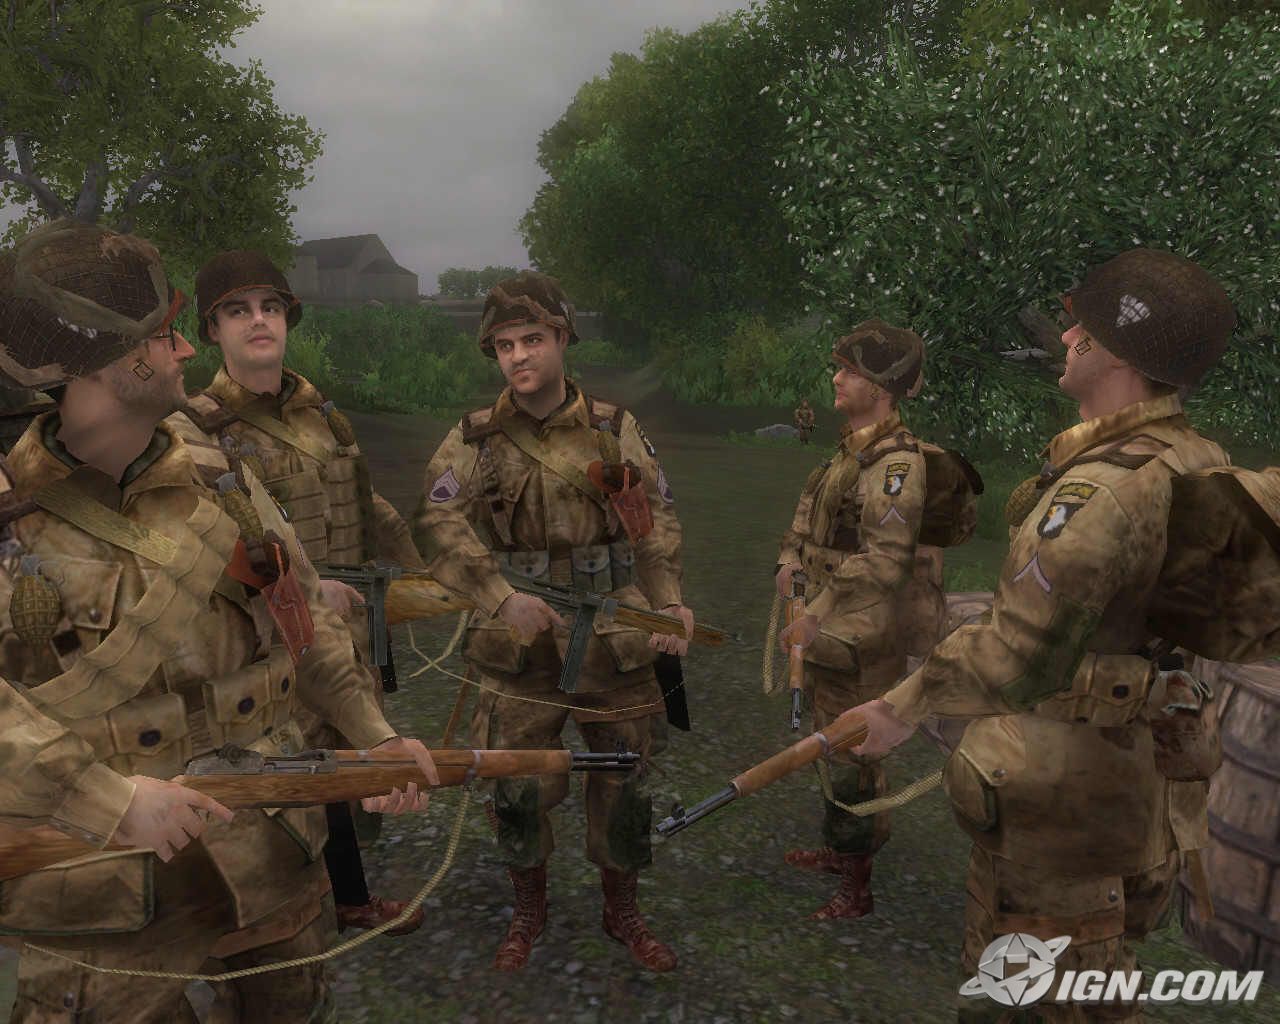 http://megagames.com/sites/default/files/game-content-images/brothers-in-arms-road-to-hill-30_2.jpg